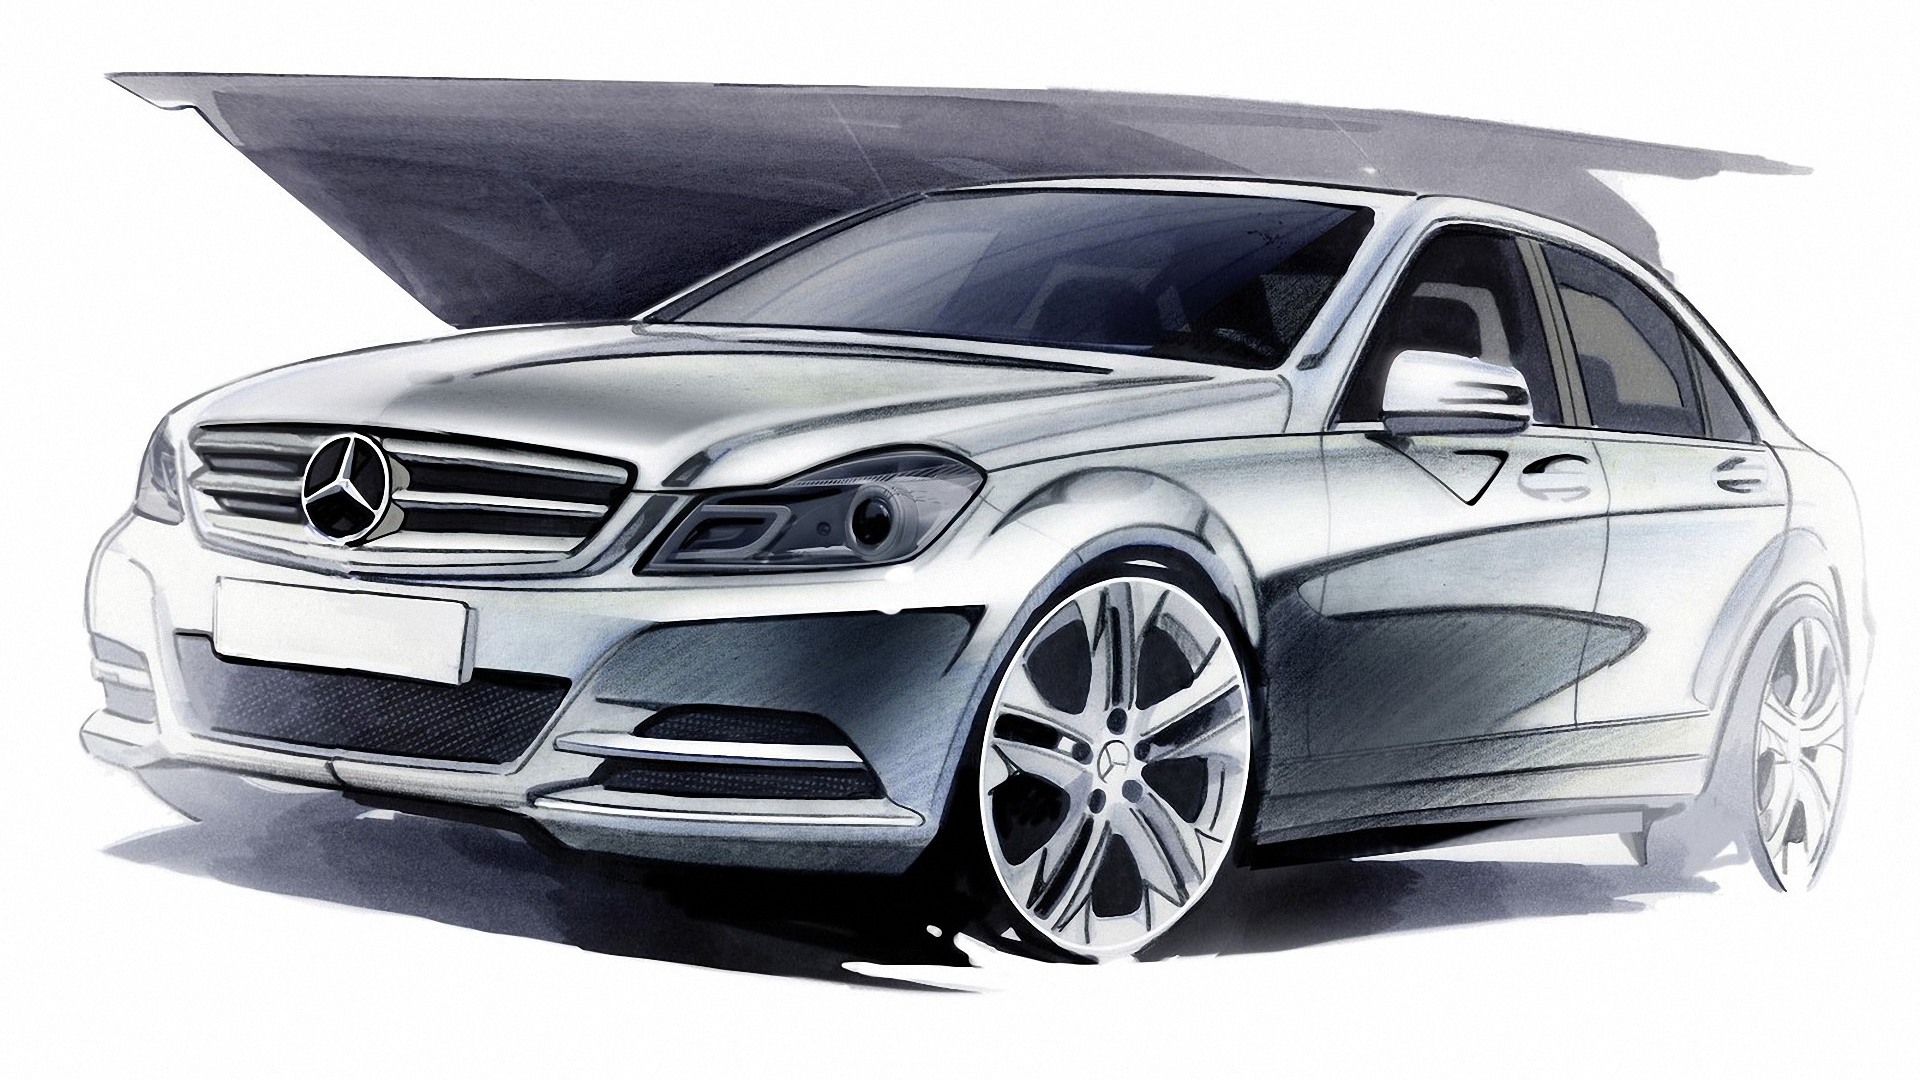 Mercedes C300 Pictures Wallpapers